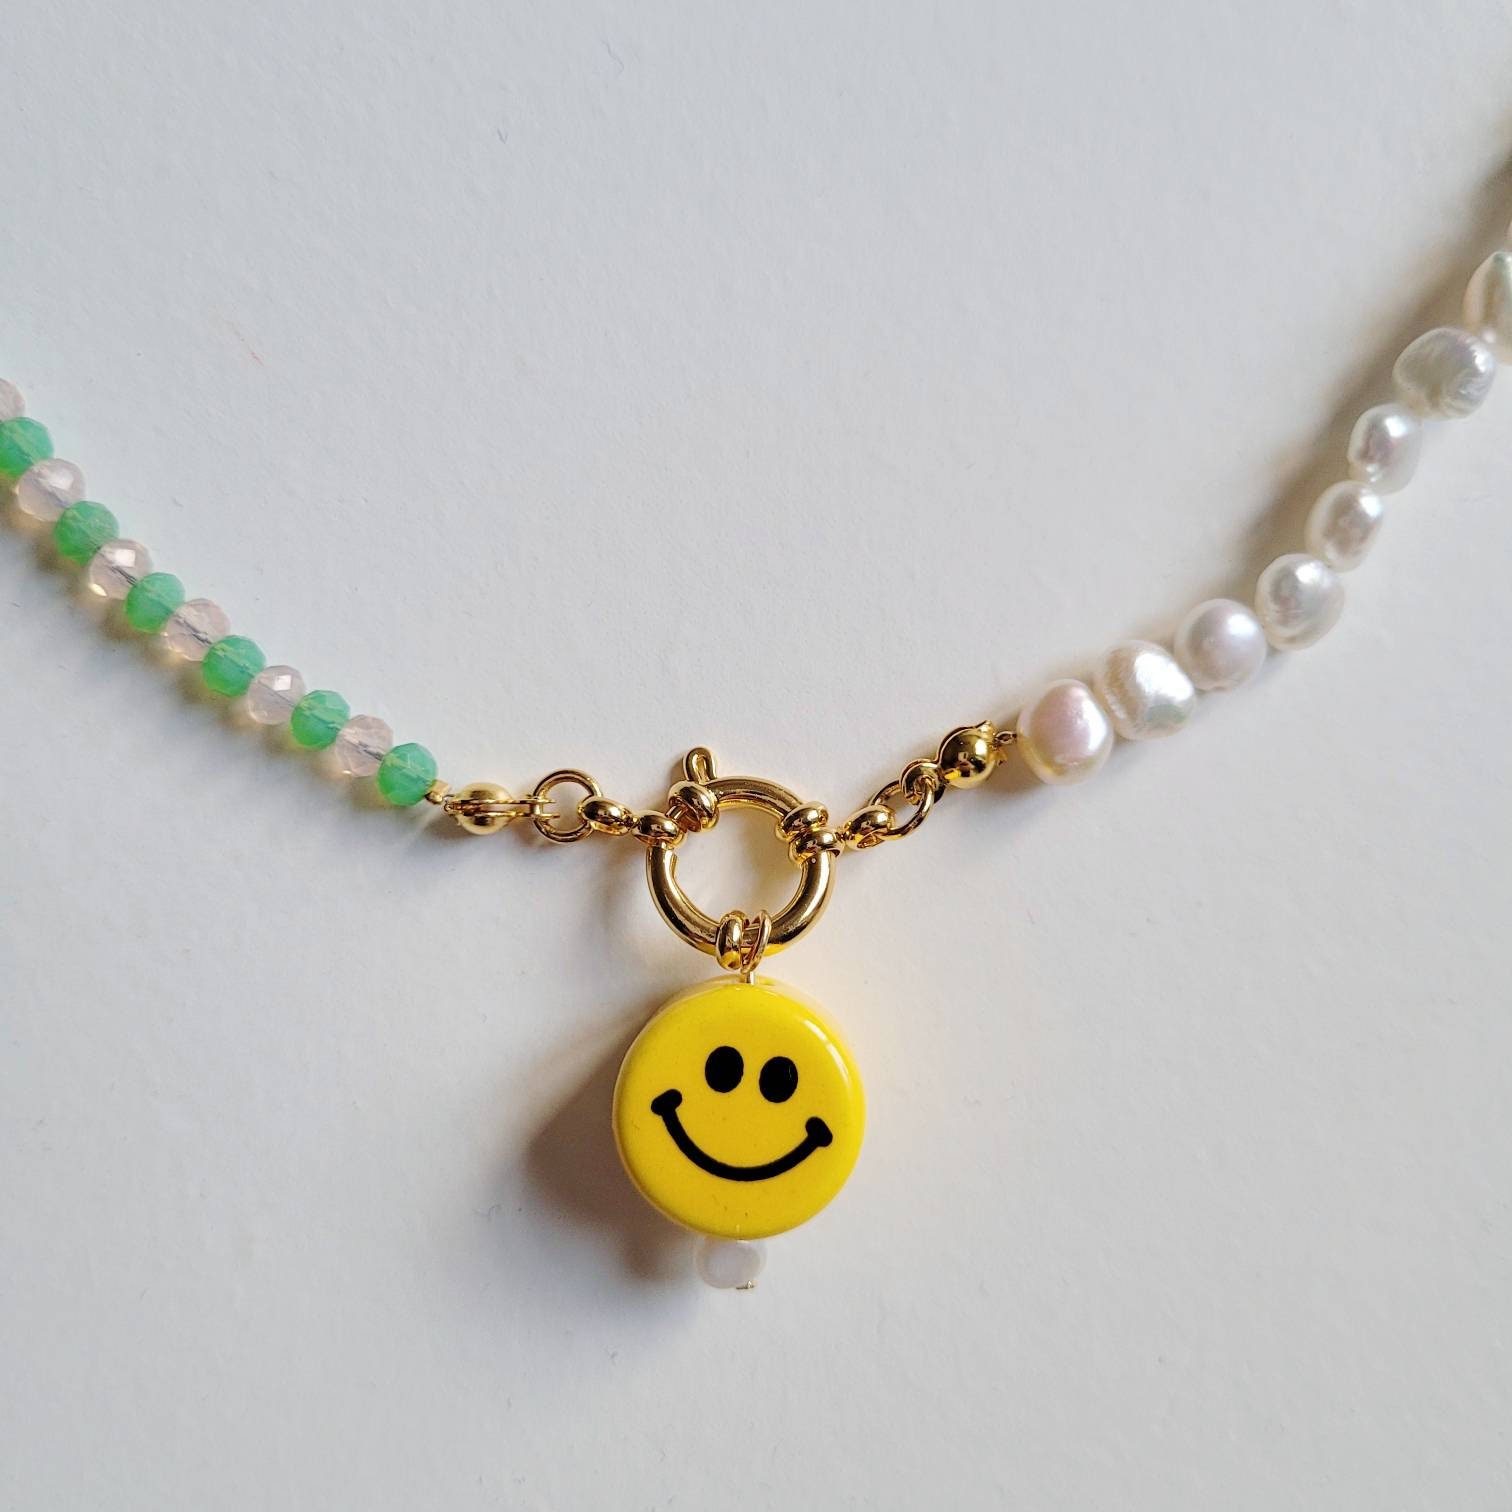 Cute Handmade Preppy Smiley Bracelets, Clay Beads, Preppy, Aesthetic, Faux Pearls, Smile, Happy, Smiley Bracelet, Colorful Heishi Beads